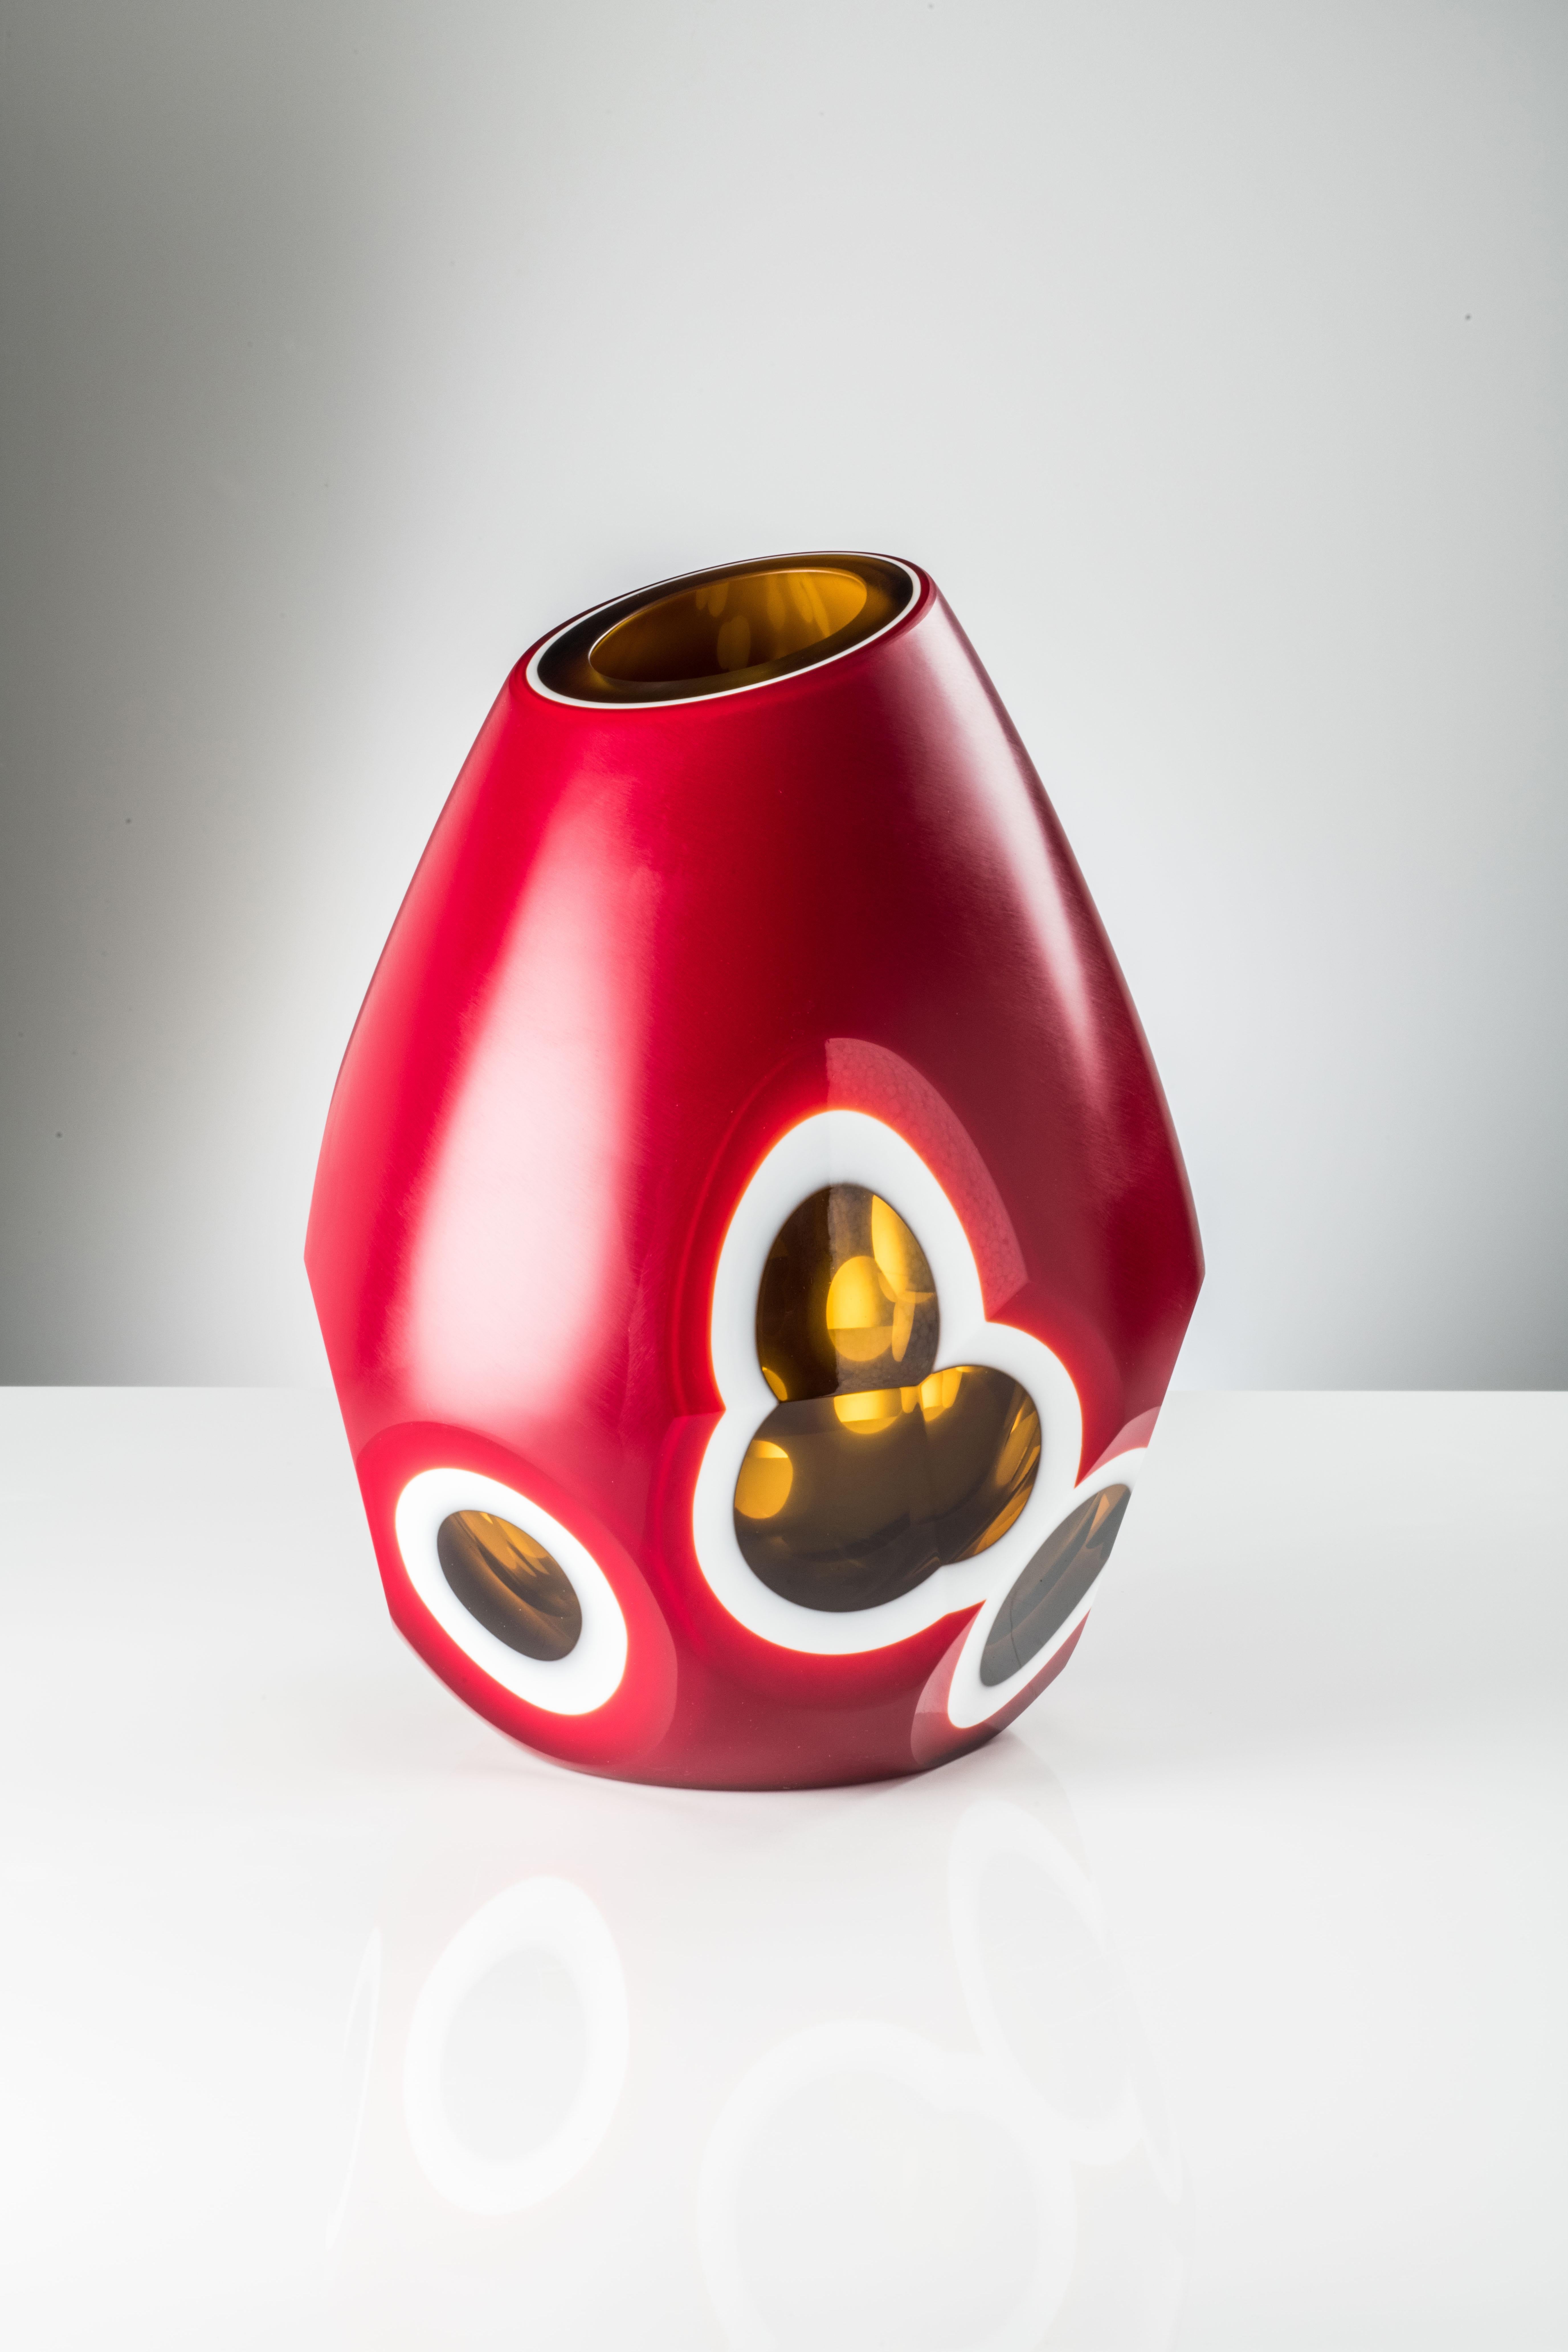 Venini glass geode vase with angular body in red, milk-white, amber and yellow designed in 2018 by Sonia Pedrazzini. Perfect for indoor home decor as container or strong statement piece for any room. Limited production of only 99